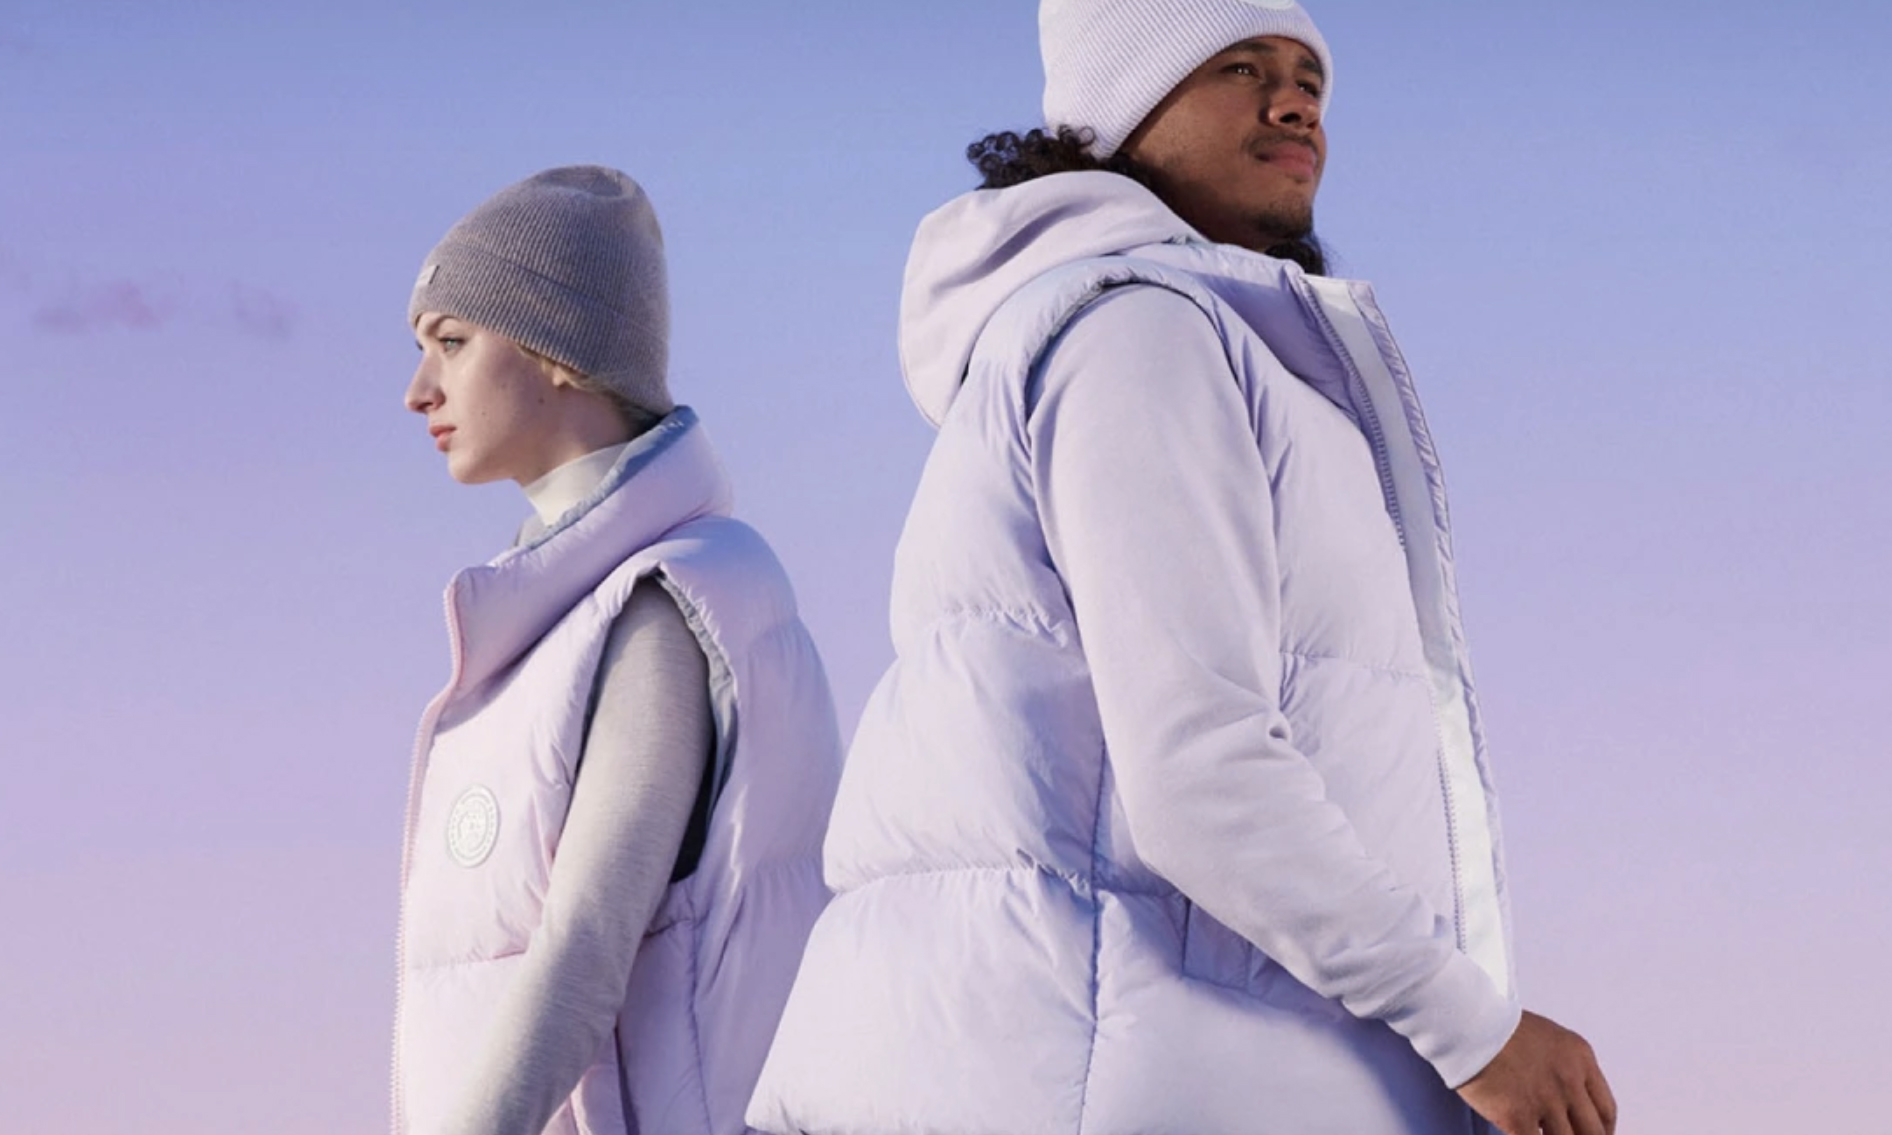 CANADA GOOSE「Pastels」系列华彩登场